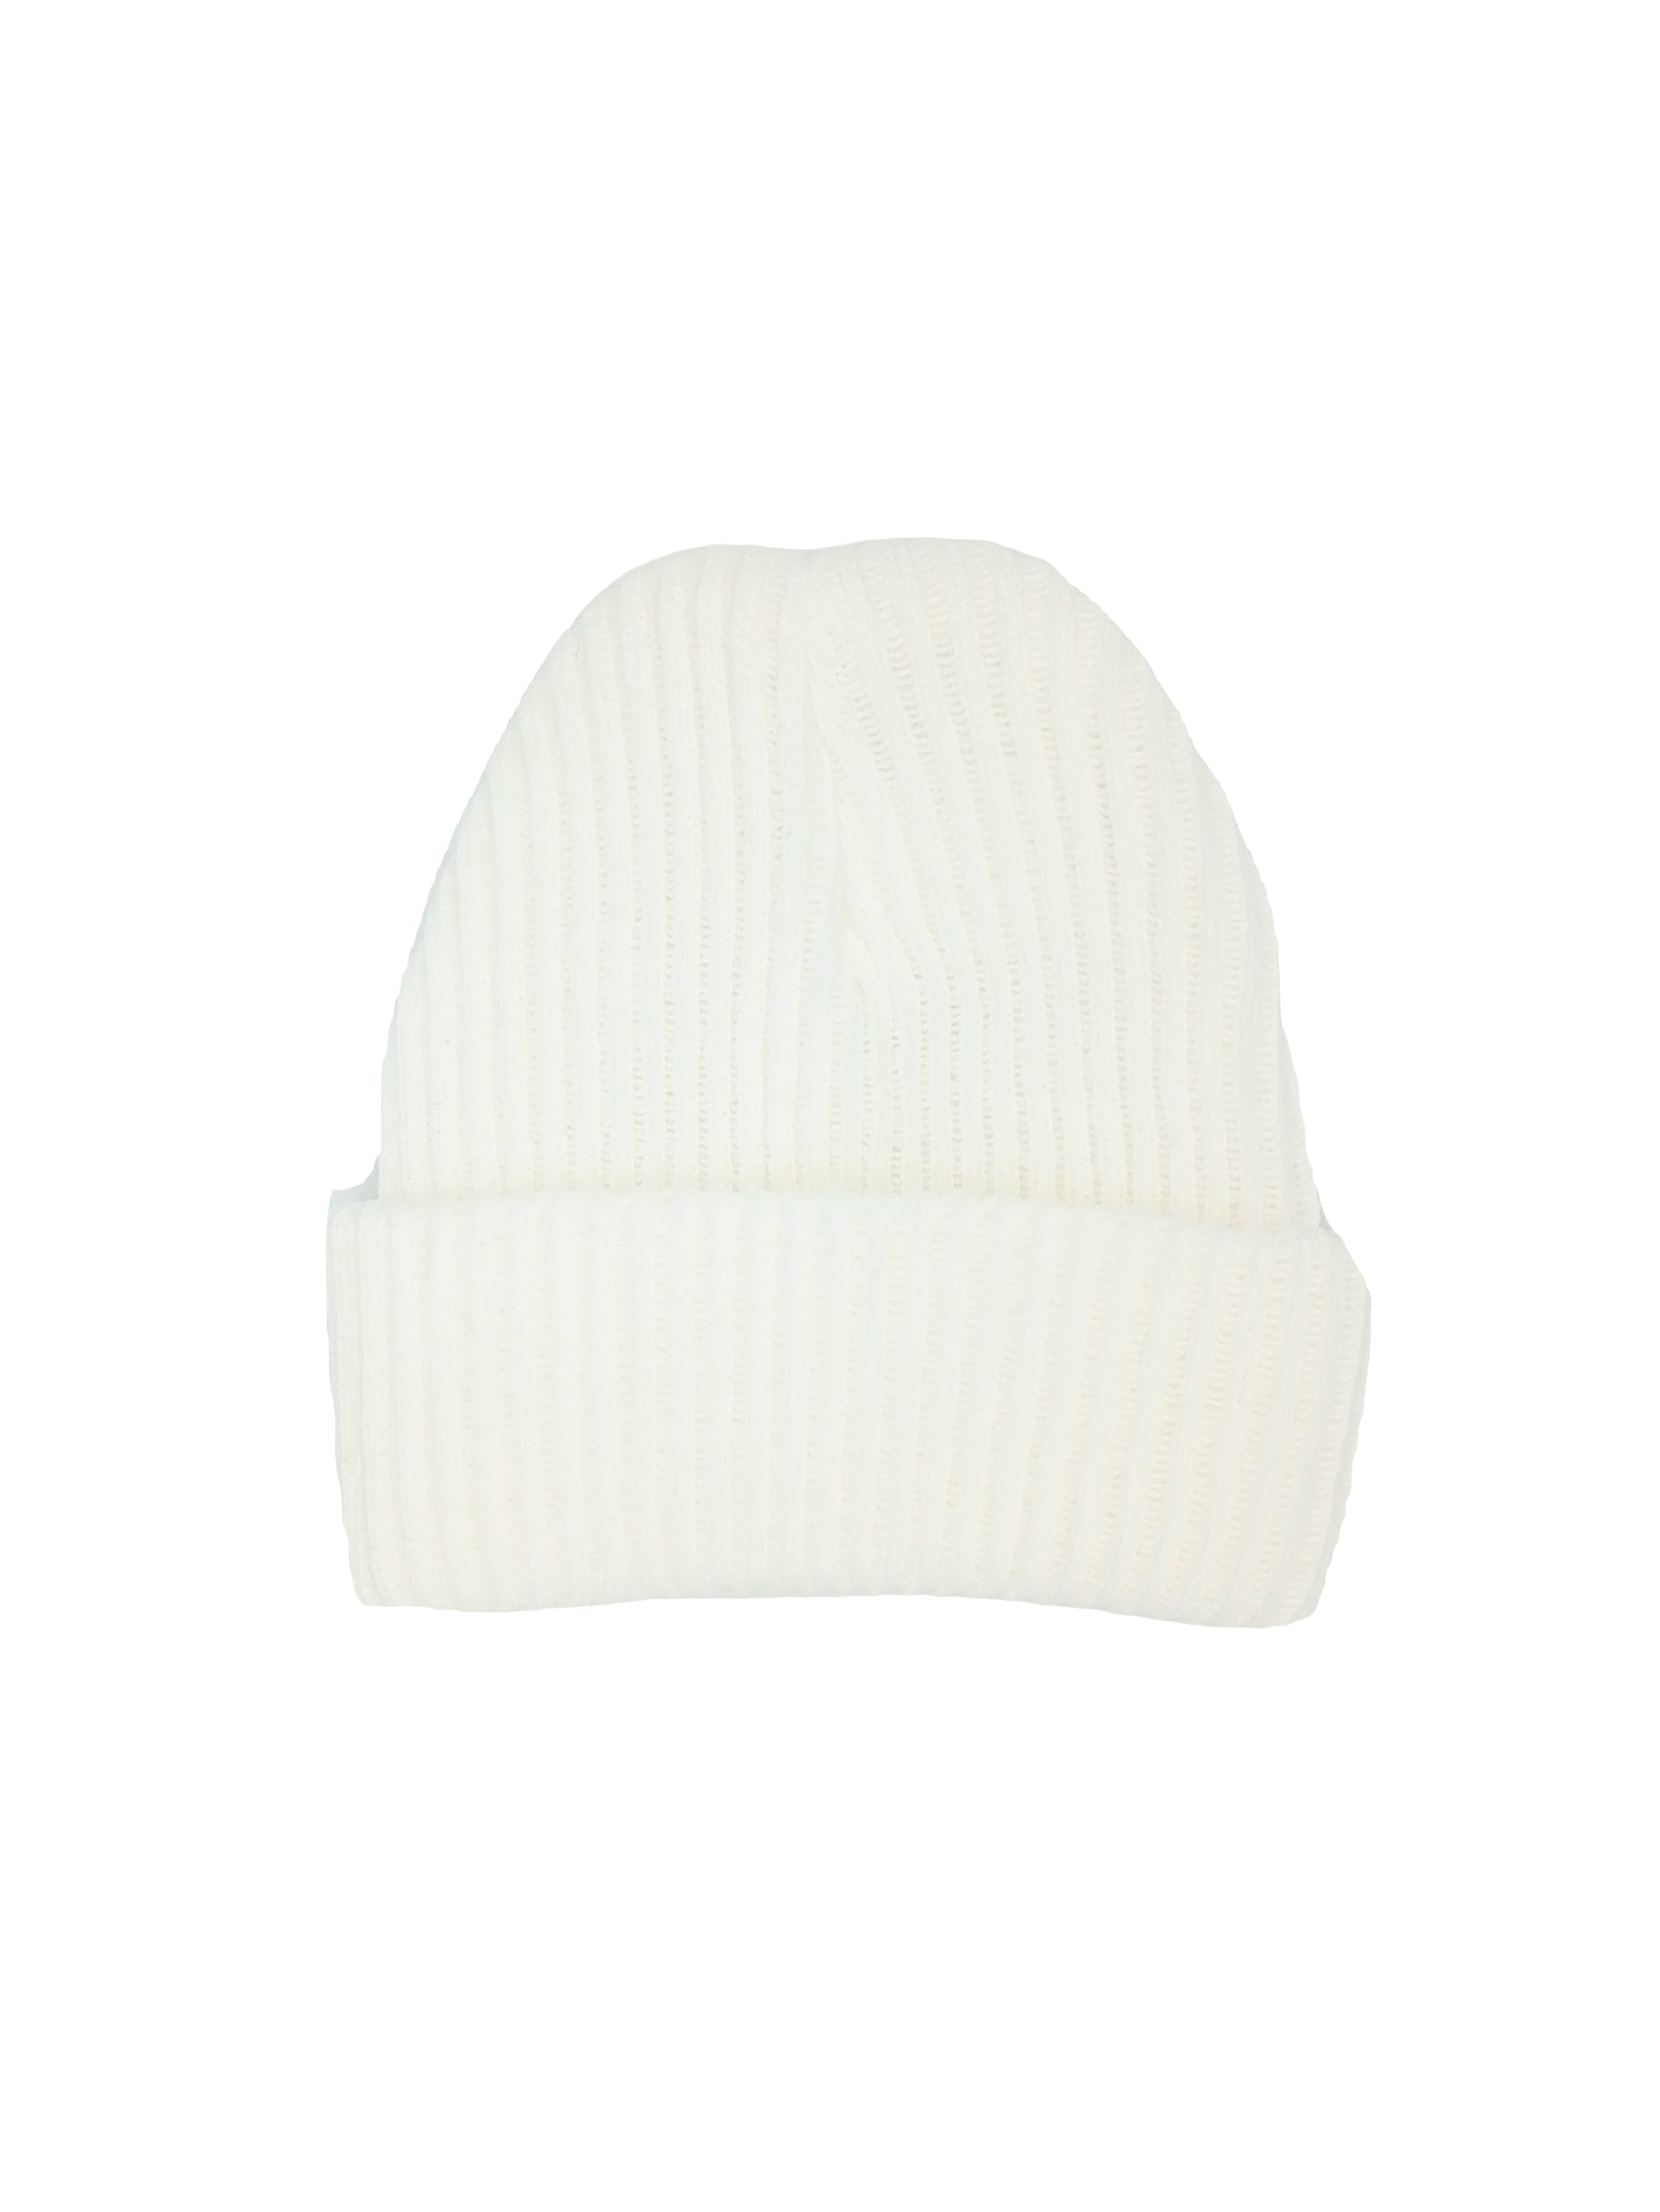 Premature Baby White Knitted Hat - Hat - Little Mouse Baby Clothing and Gifts Ltd